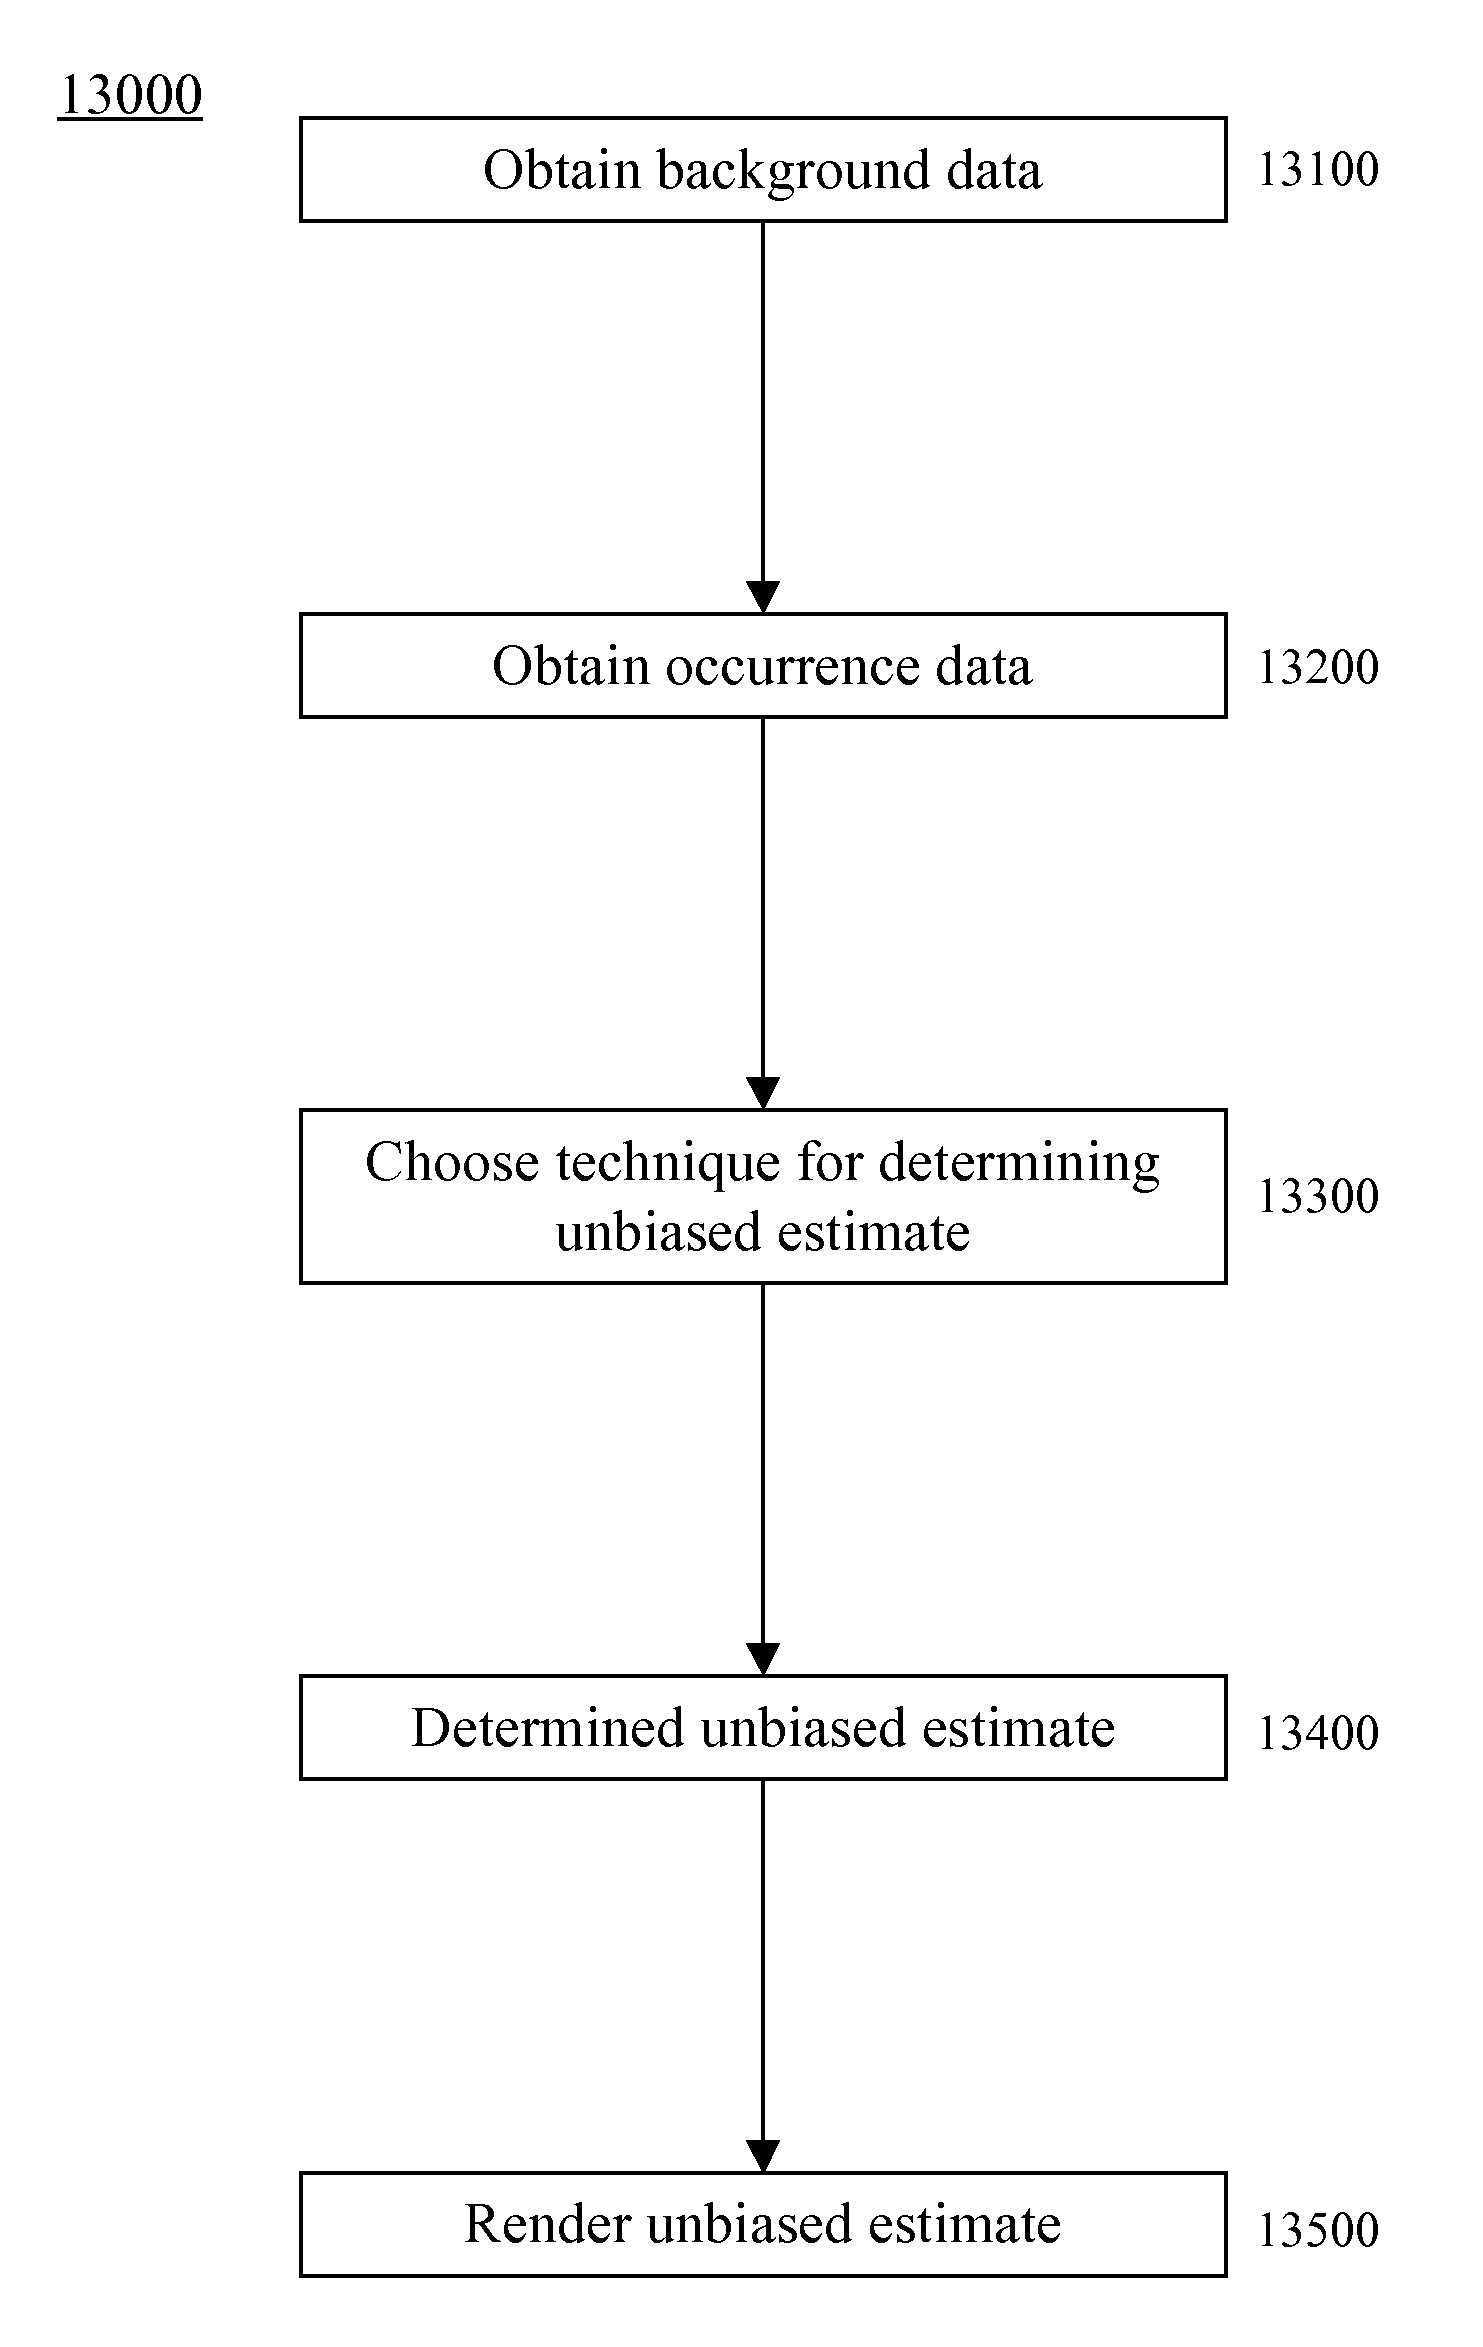 Systems, devices, and/or methods for managing sample selection bias